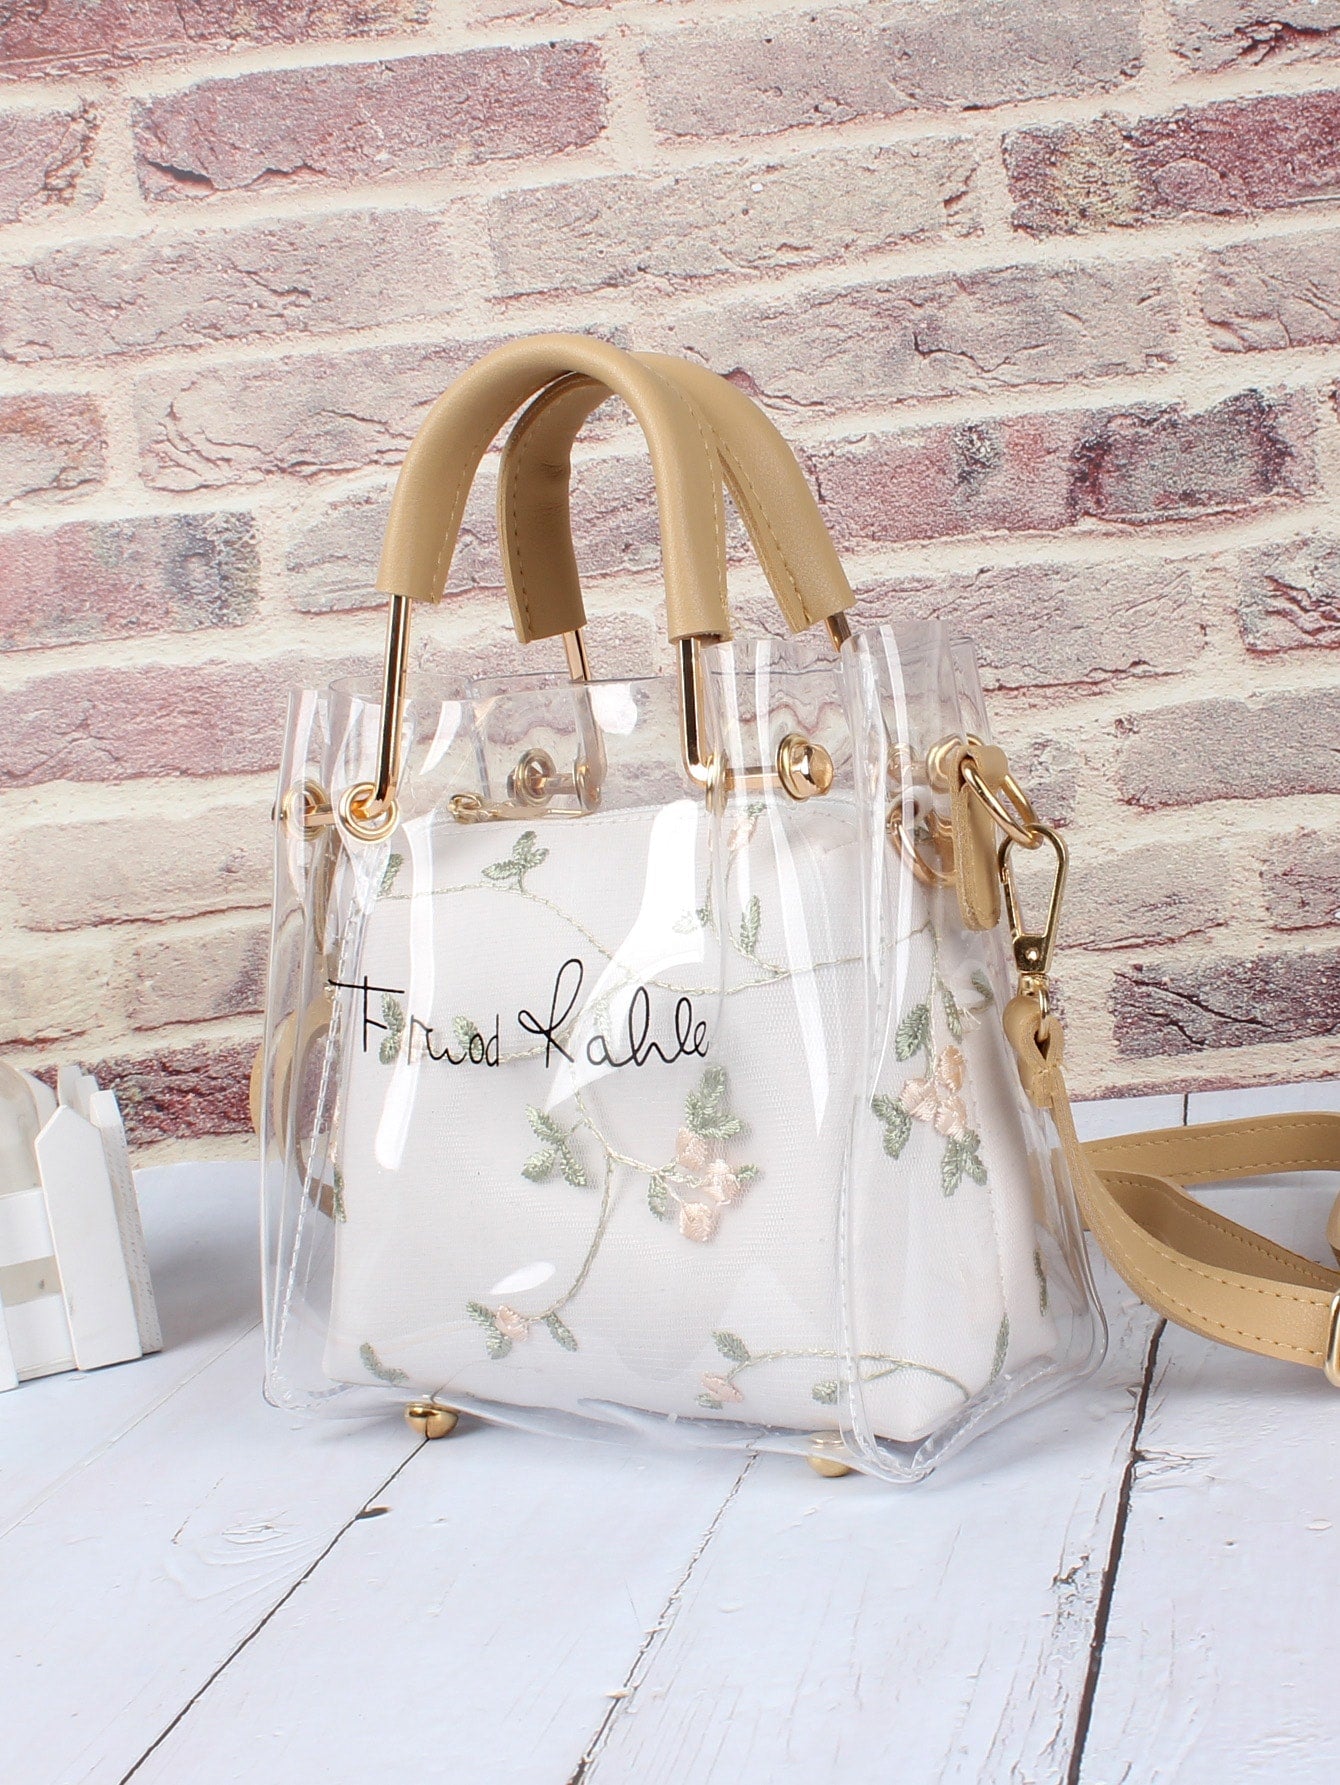 Letter Print Clear Bag With Floral Embroidered Inner Pouch